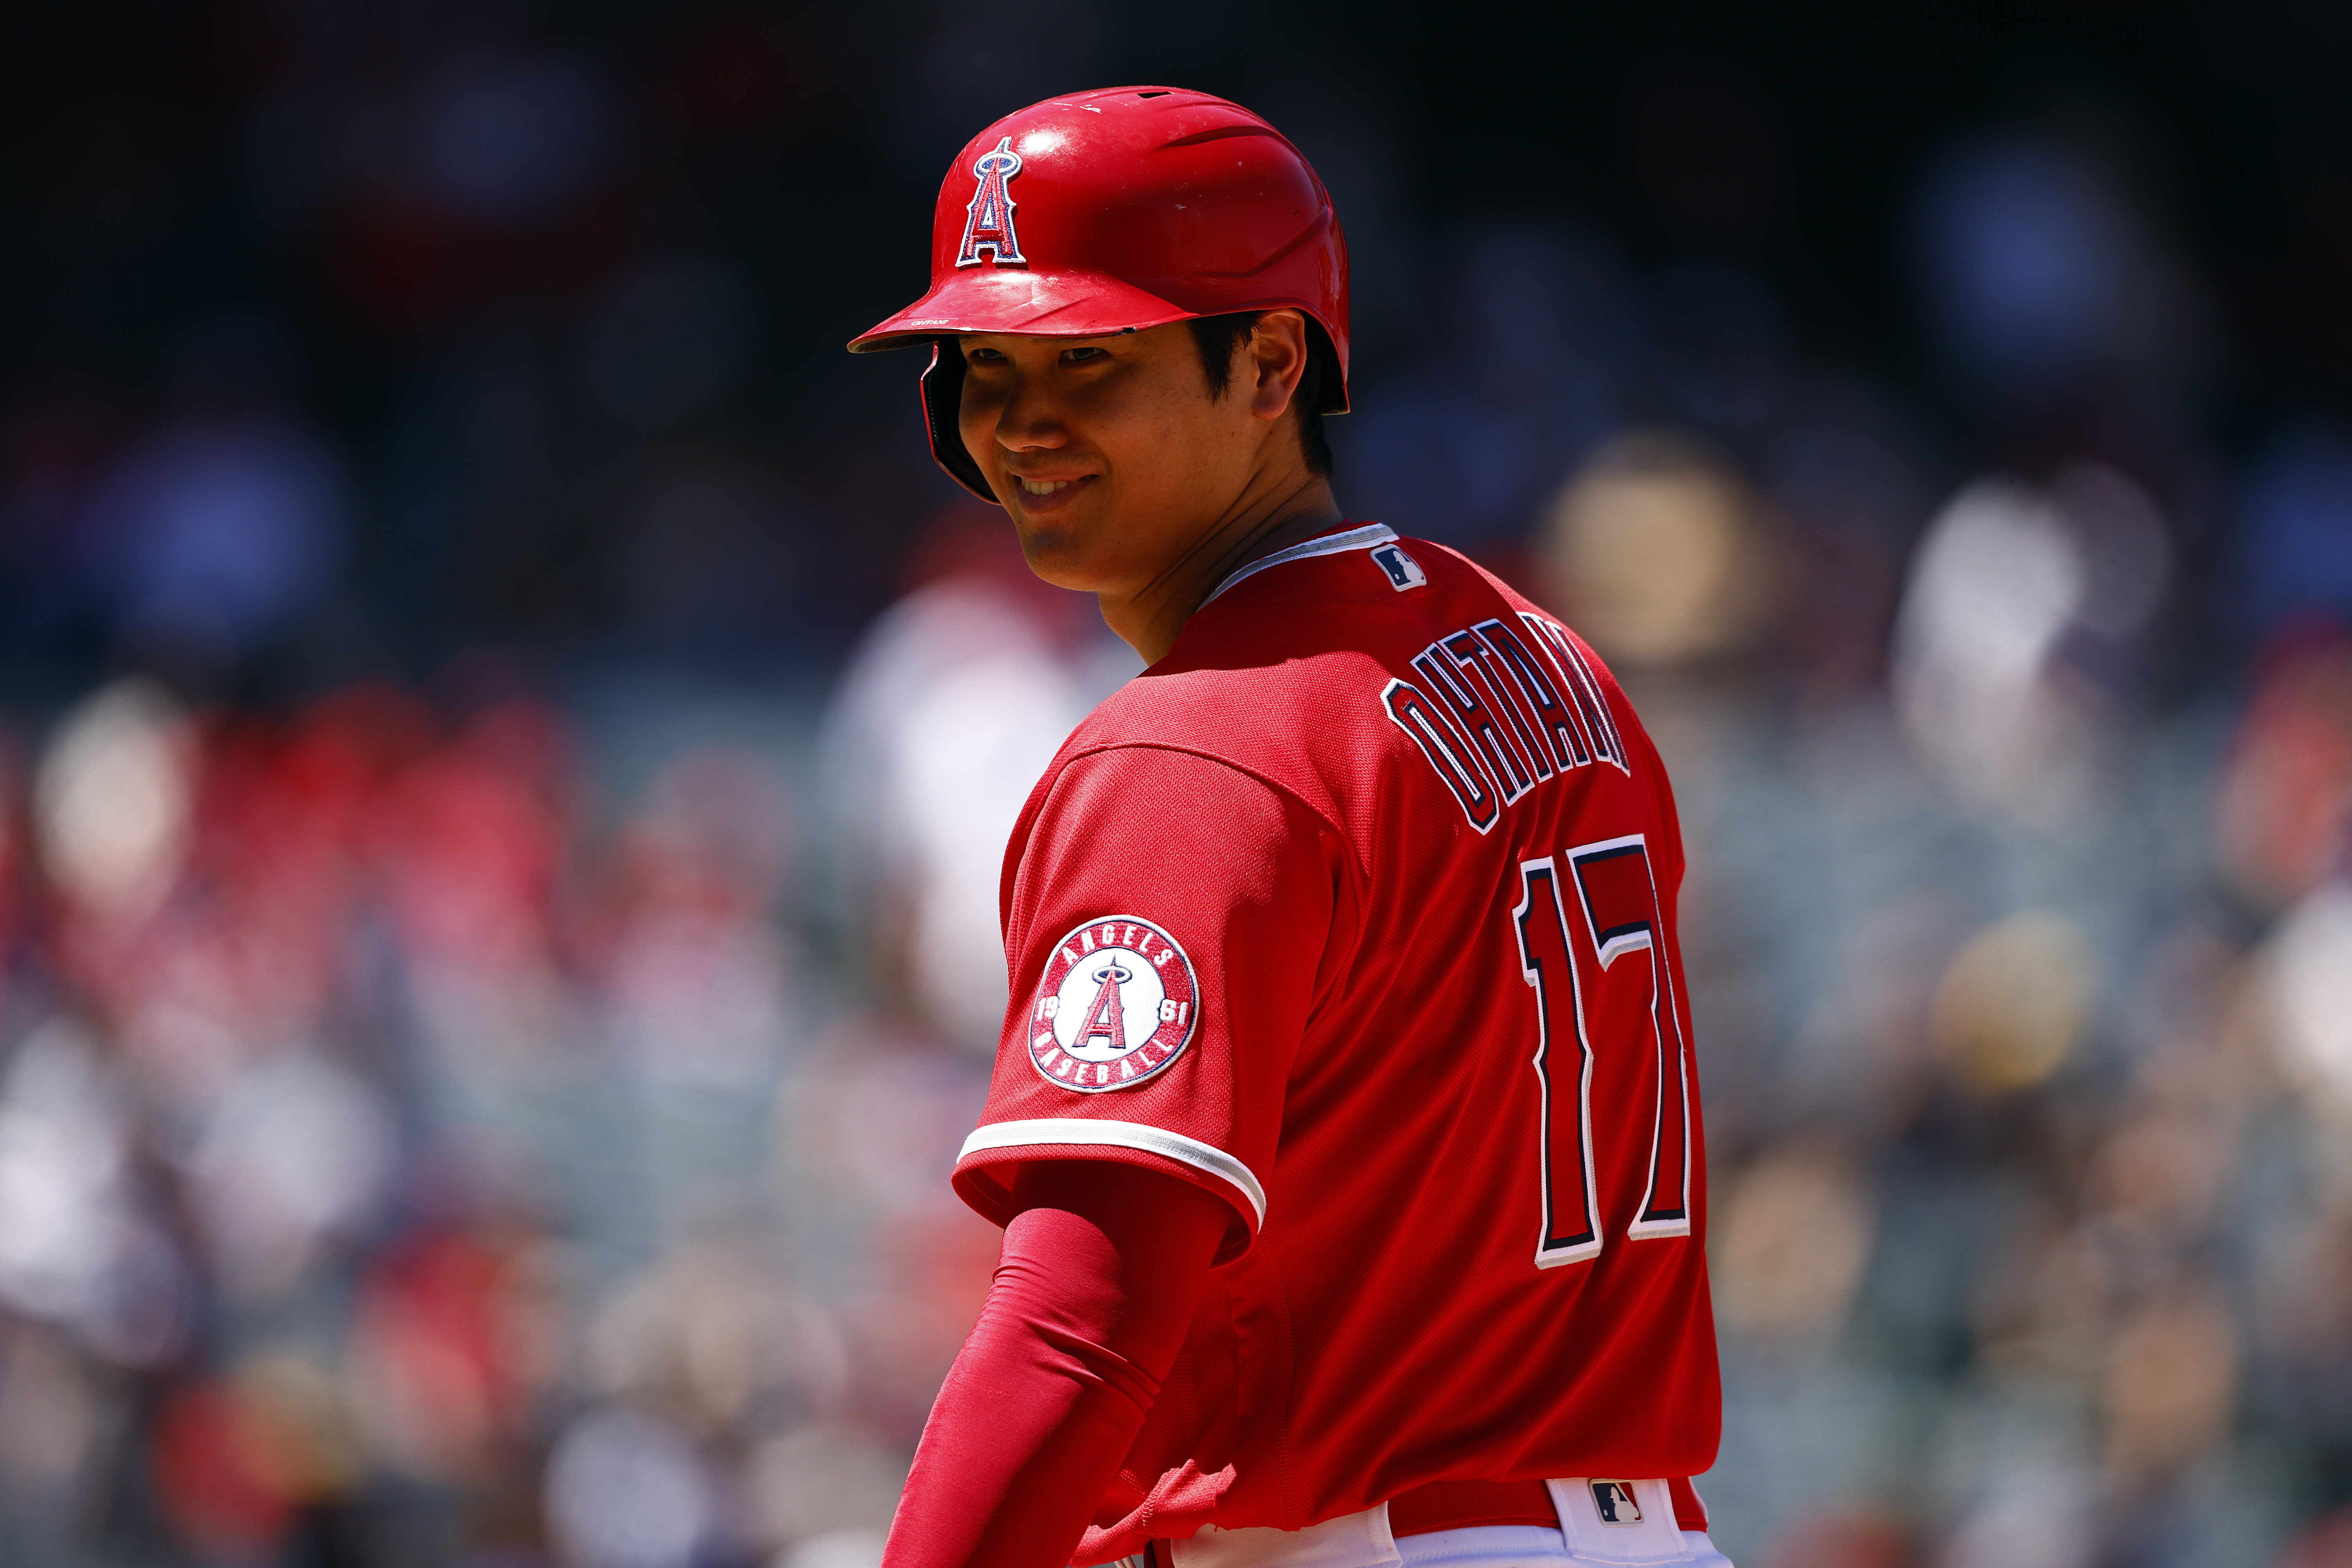 Shohei Ohtani is Still the League's Most Valuable Player